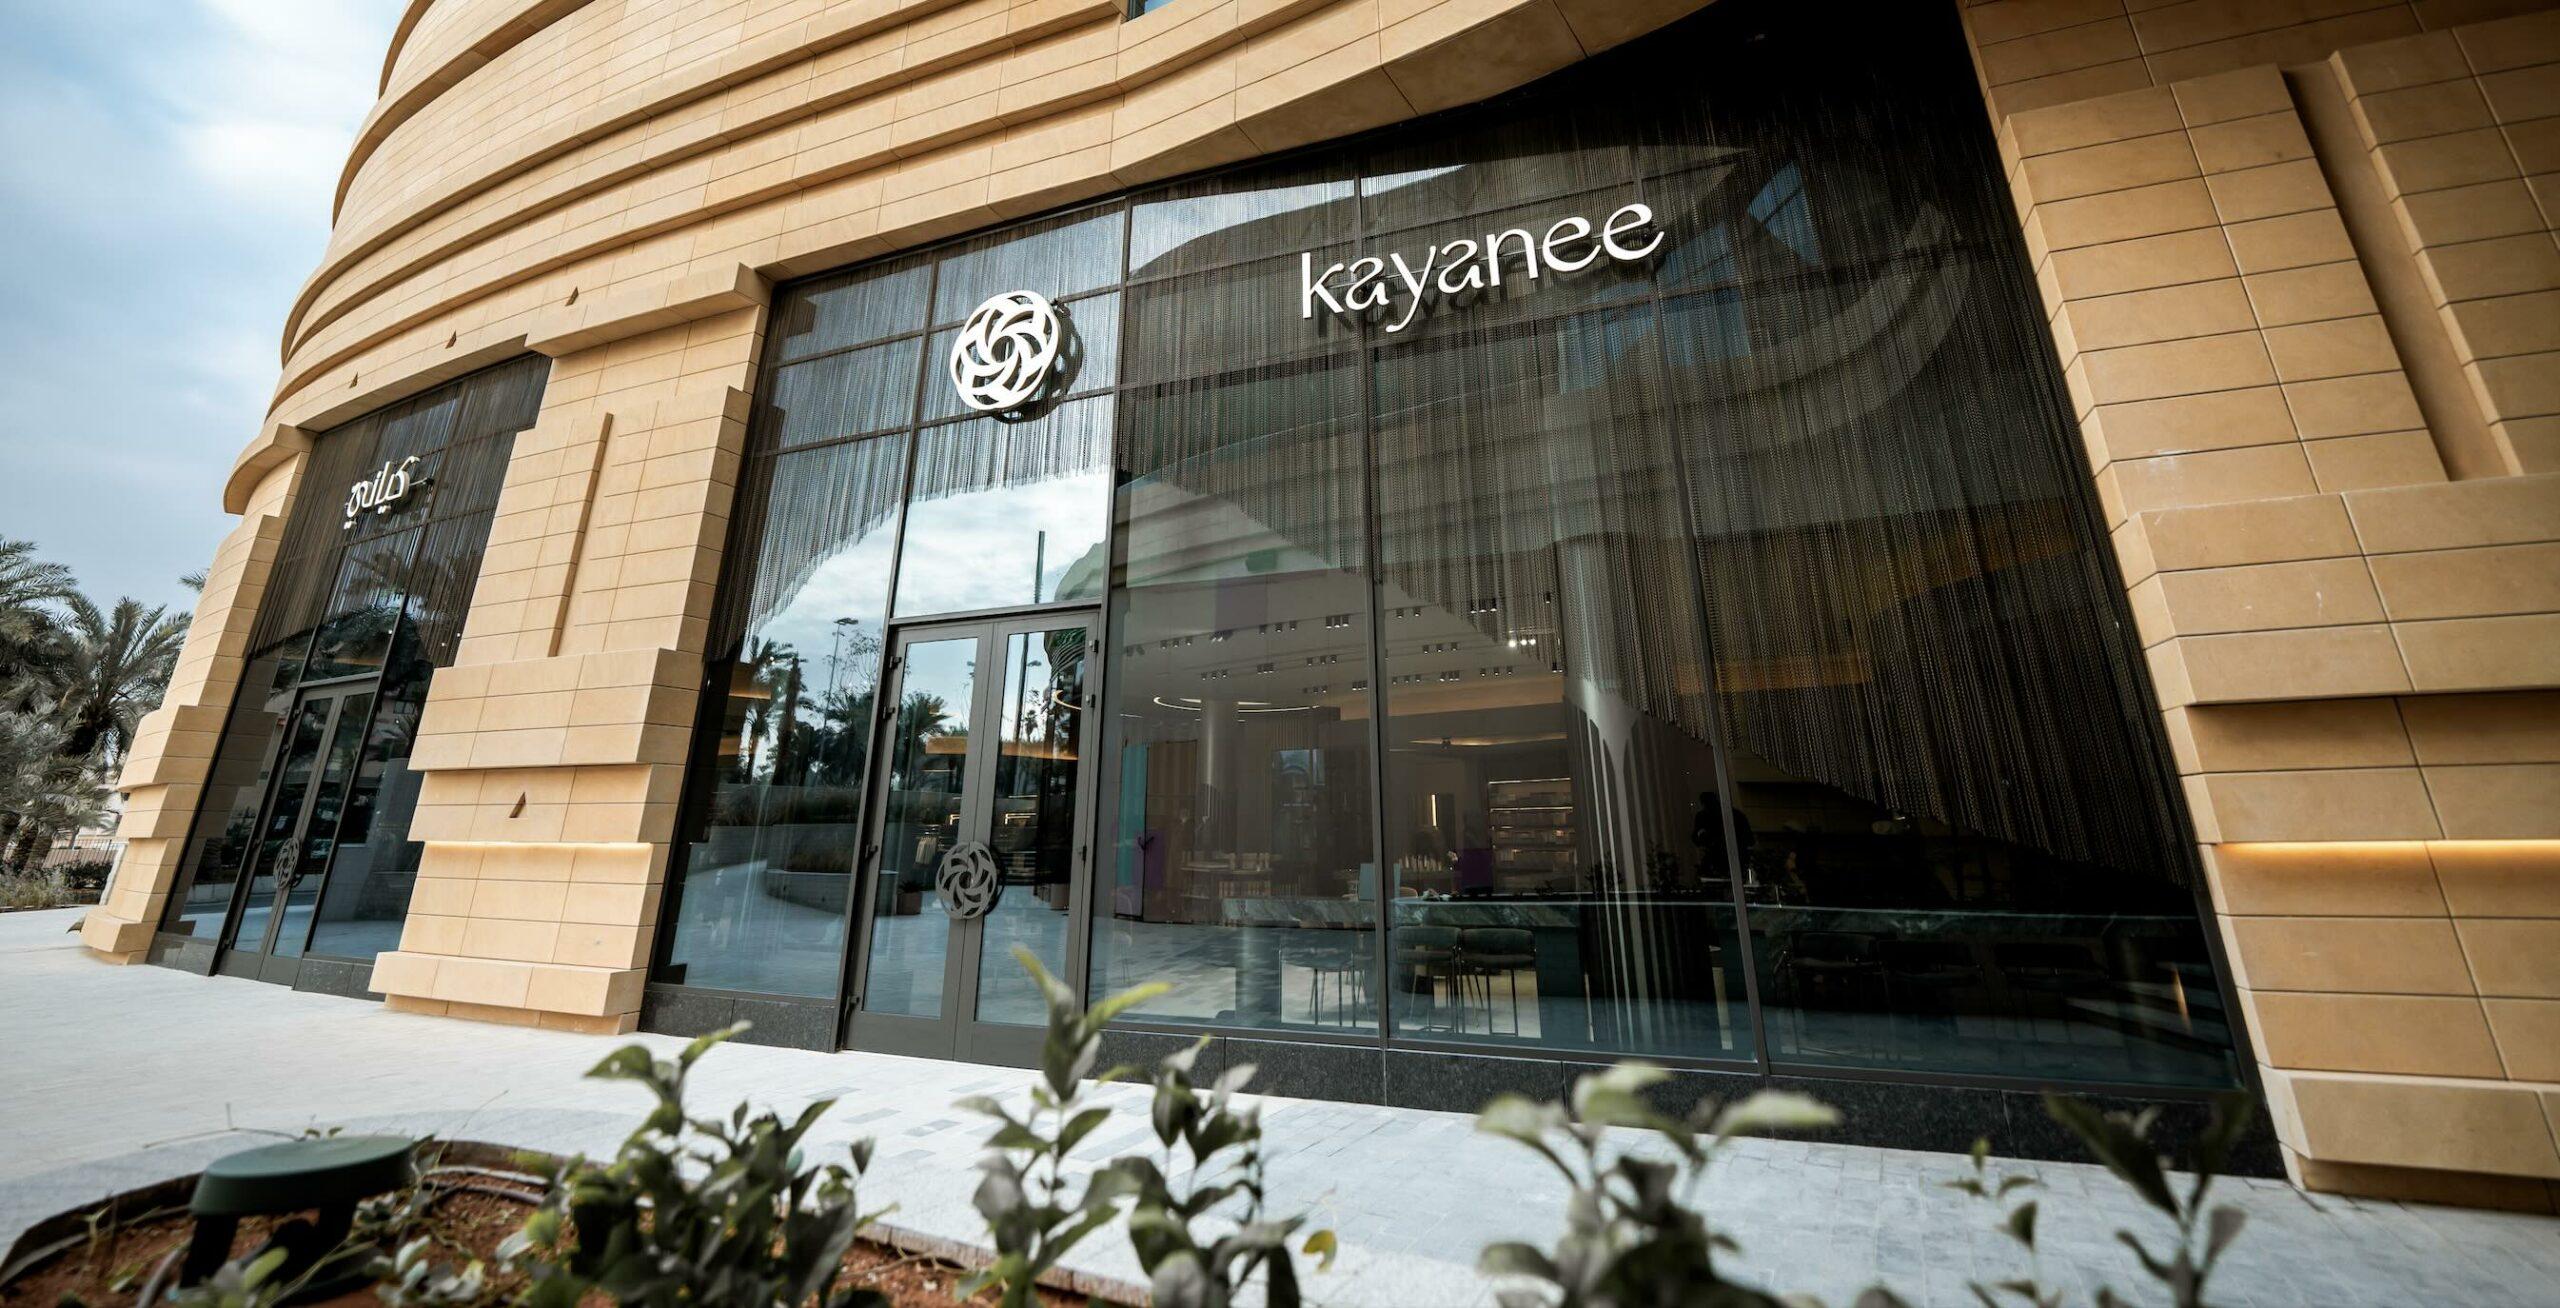 Kayanee opens first flagship store in Riyadh